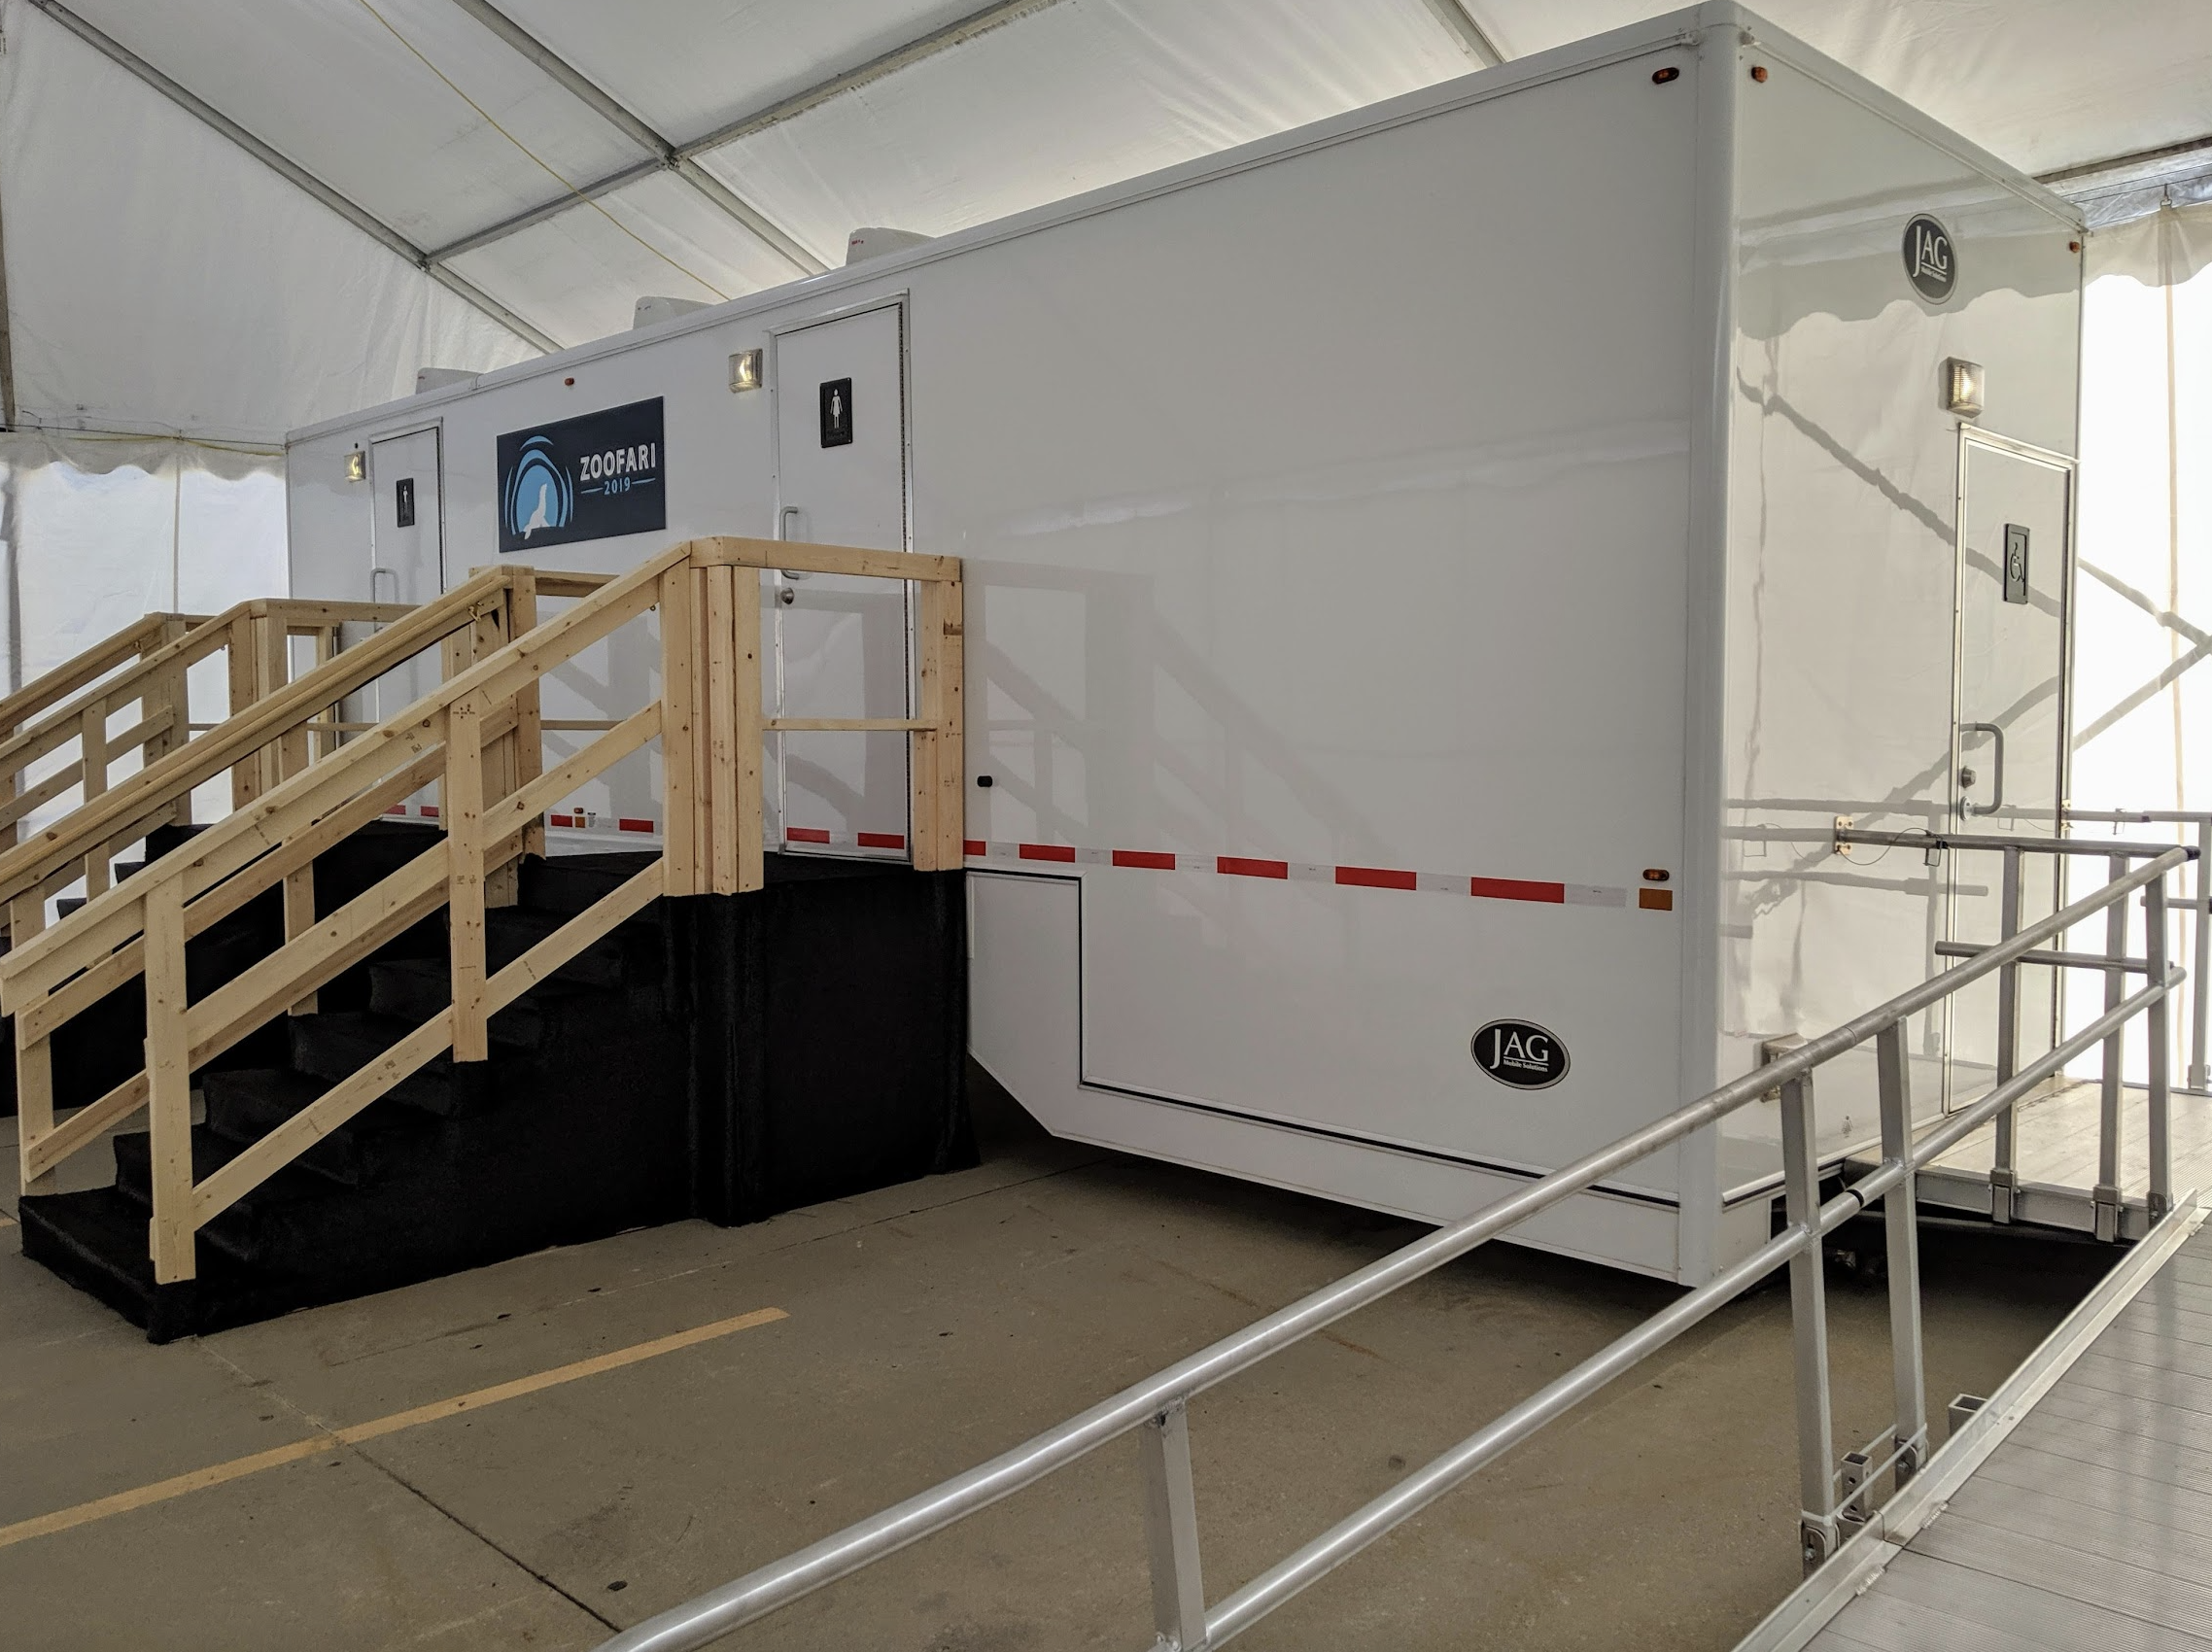 Shower and Restroom Trailer Rentals 1683161954 Screenshot 2023 05 03 at 2.23.30 PM - Discover the Benefits of ADA Restroom Trailers for Your Event